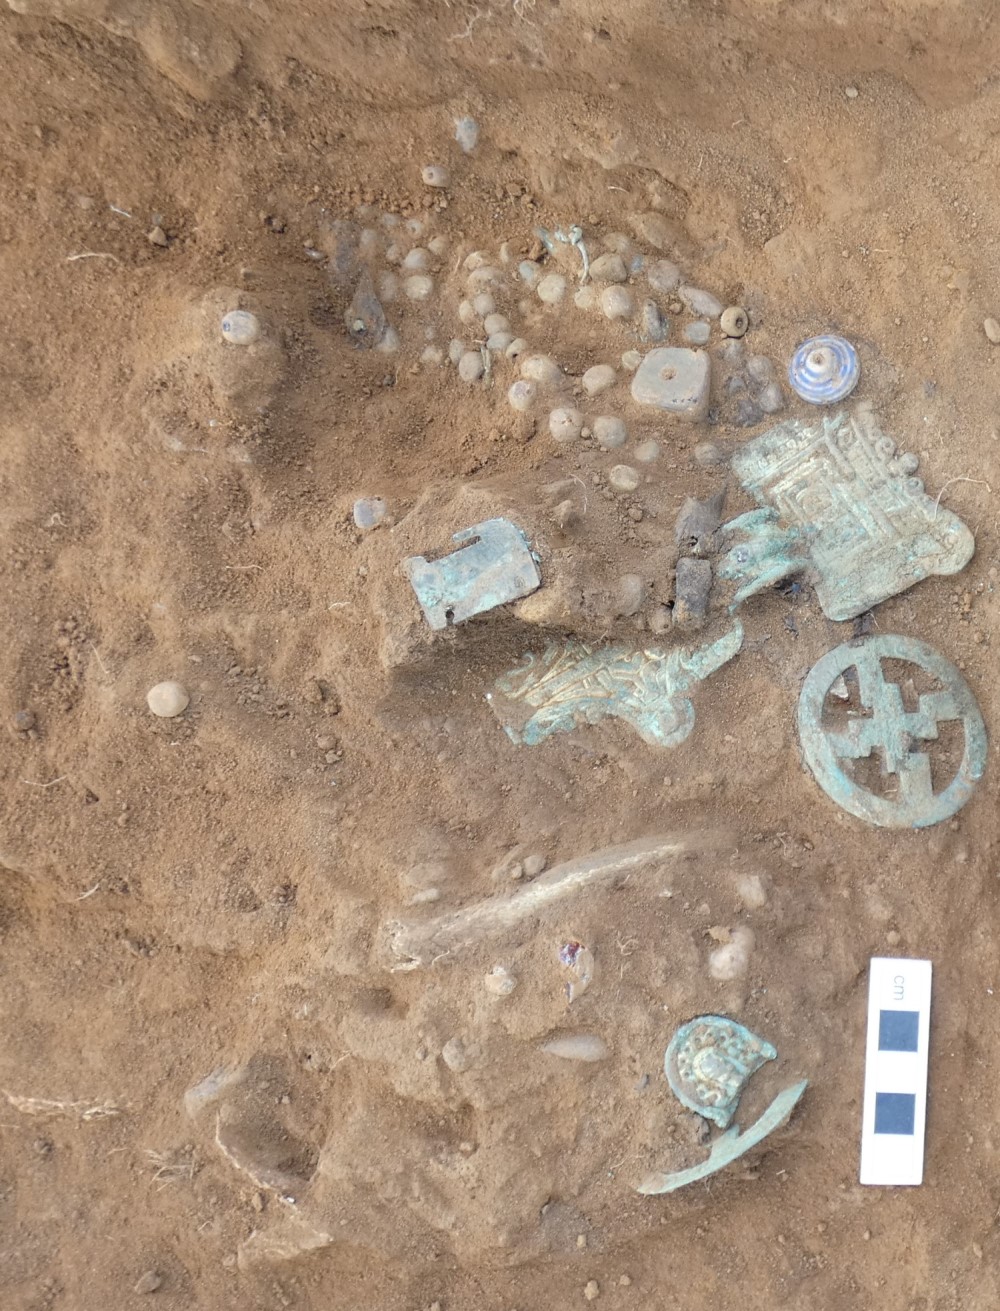 Collection of beads and brooches from Burial 1